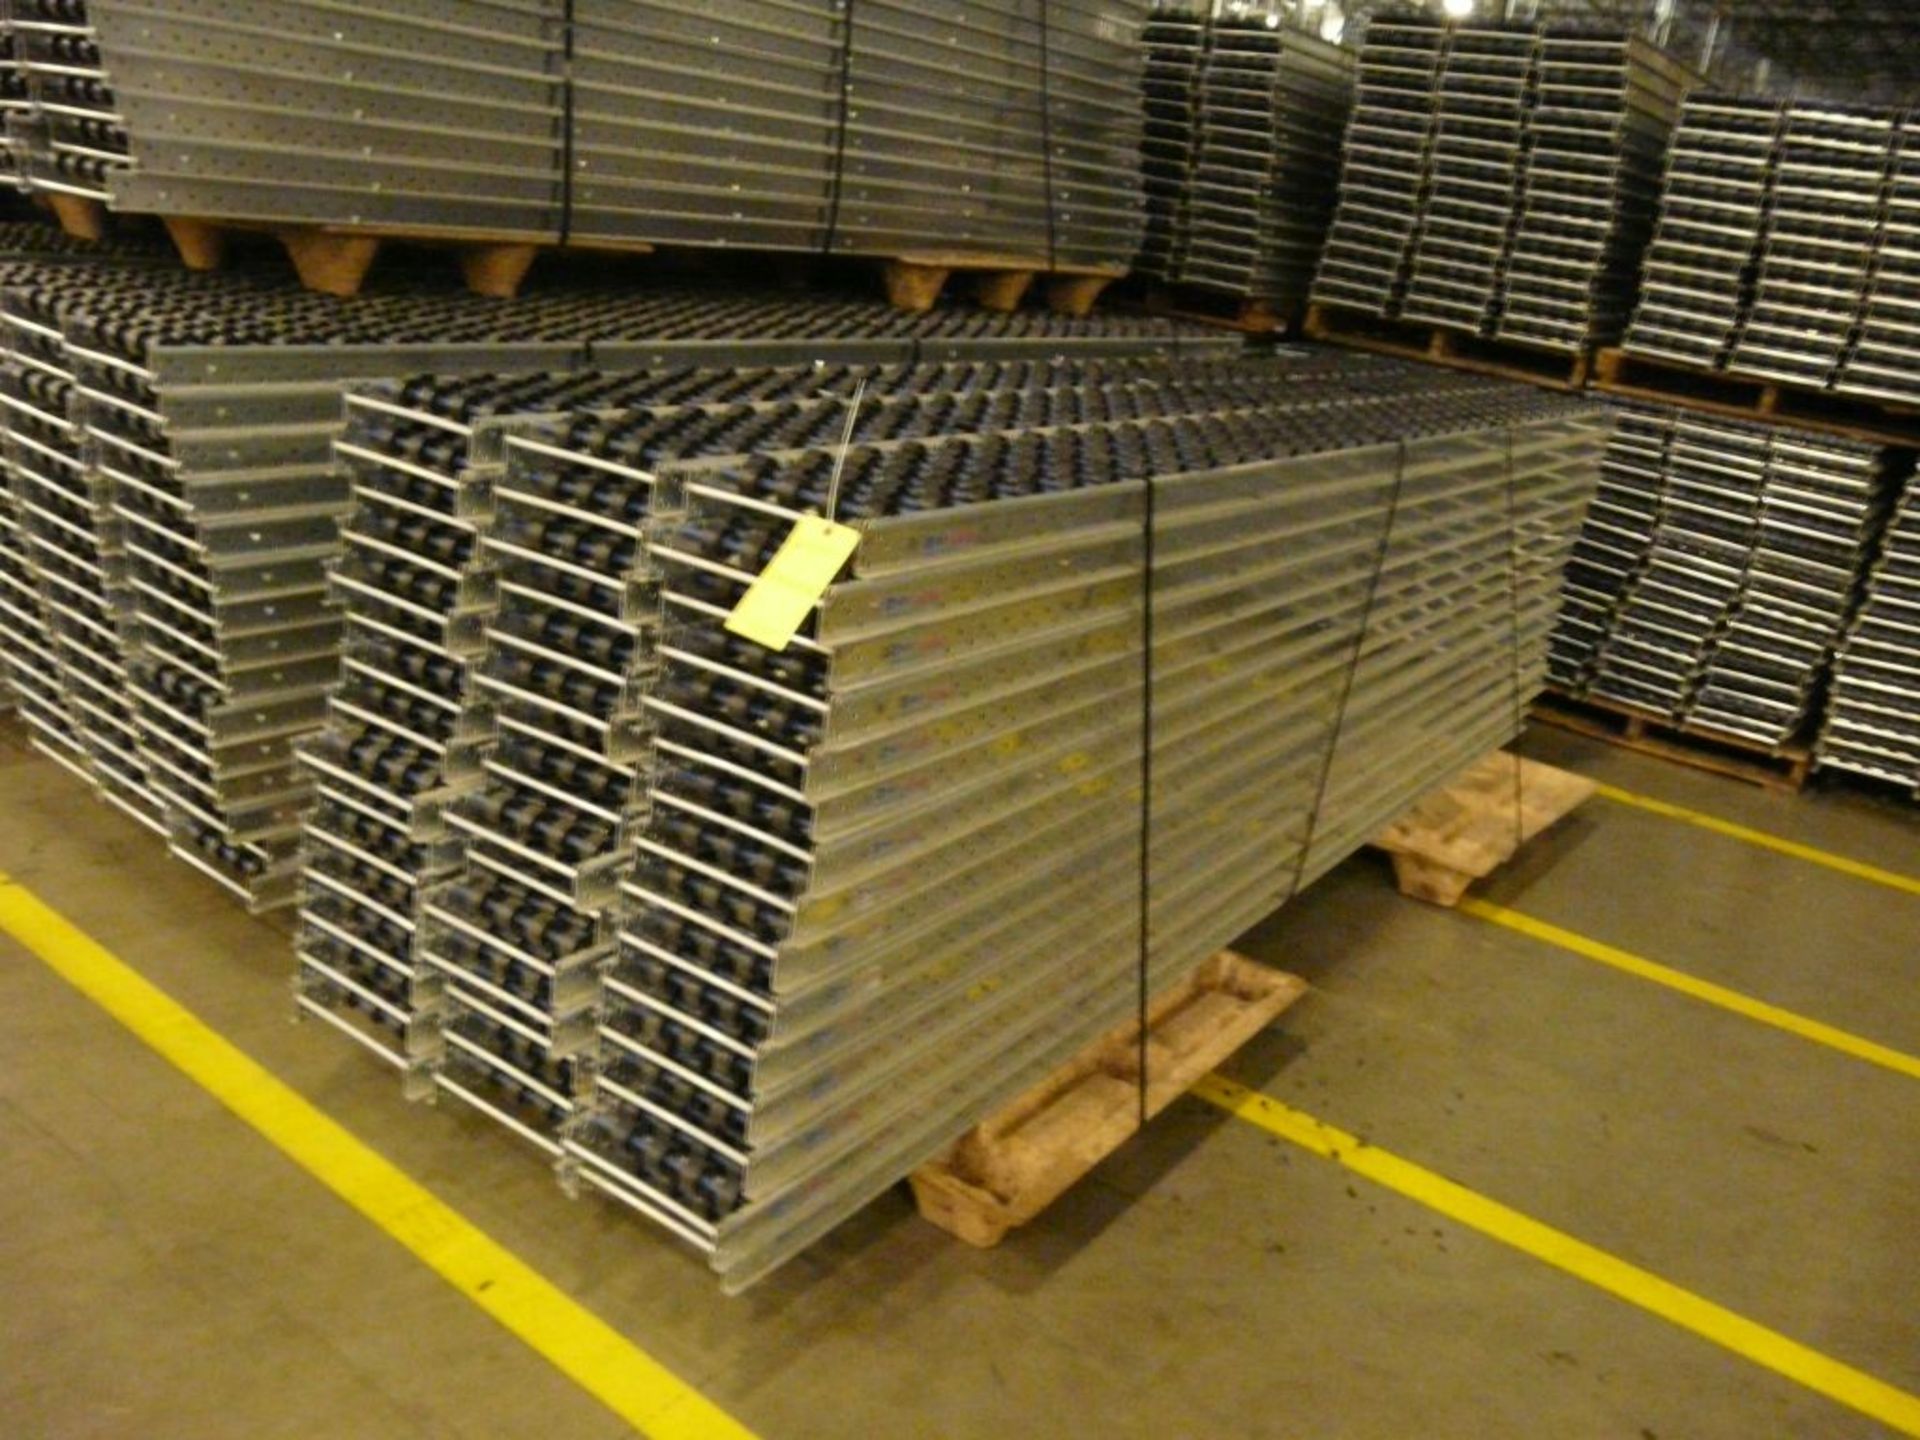 Lot of (90) SpanTrack Wheelbed Carton Flow Conveyors - 11.5'L x 11"W; Tag: 223604 - $30 Lot